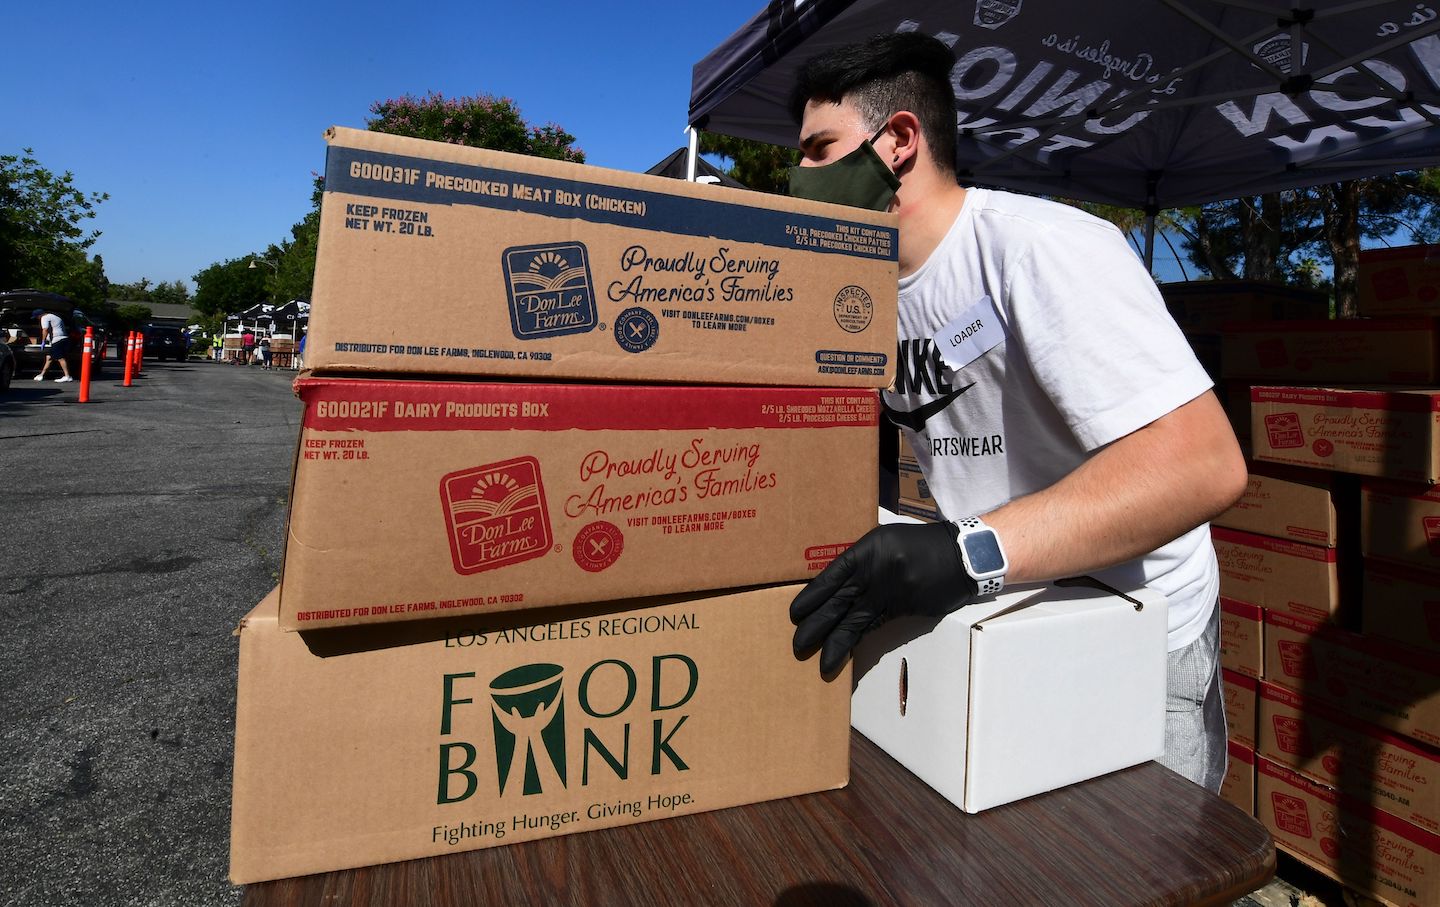 Western States Are at the Forefront of Fighting Hunger